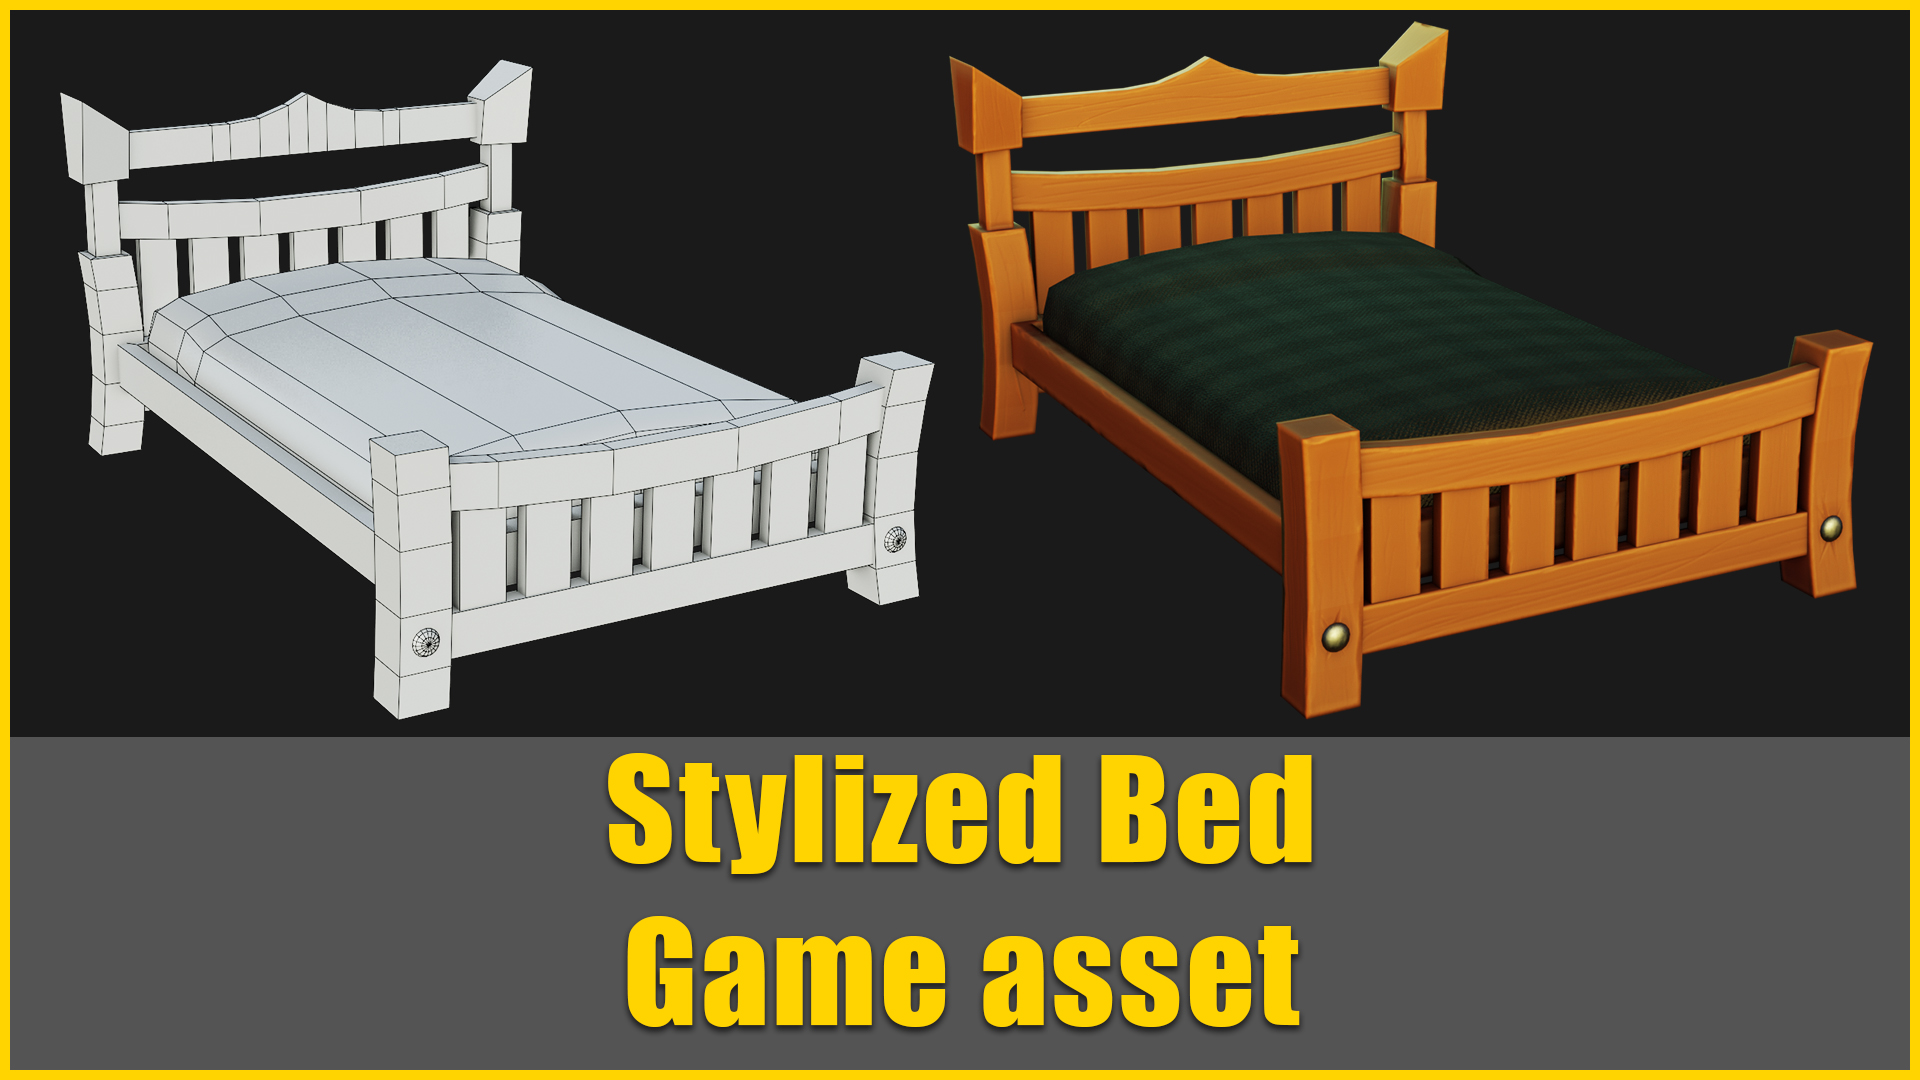 Stylized Bed Game Asset (Time lapse) - Blender 2.8, Zbrush, Substance  Painter 